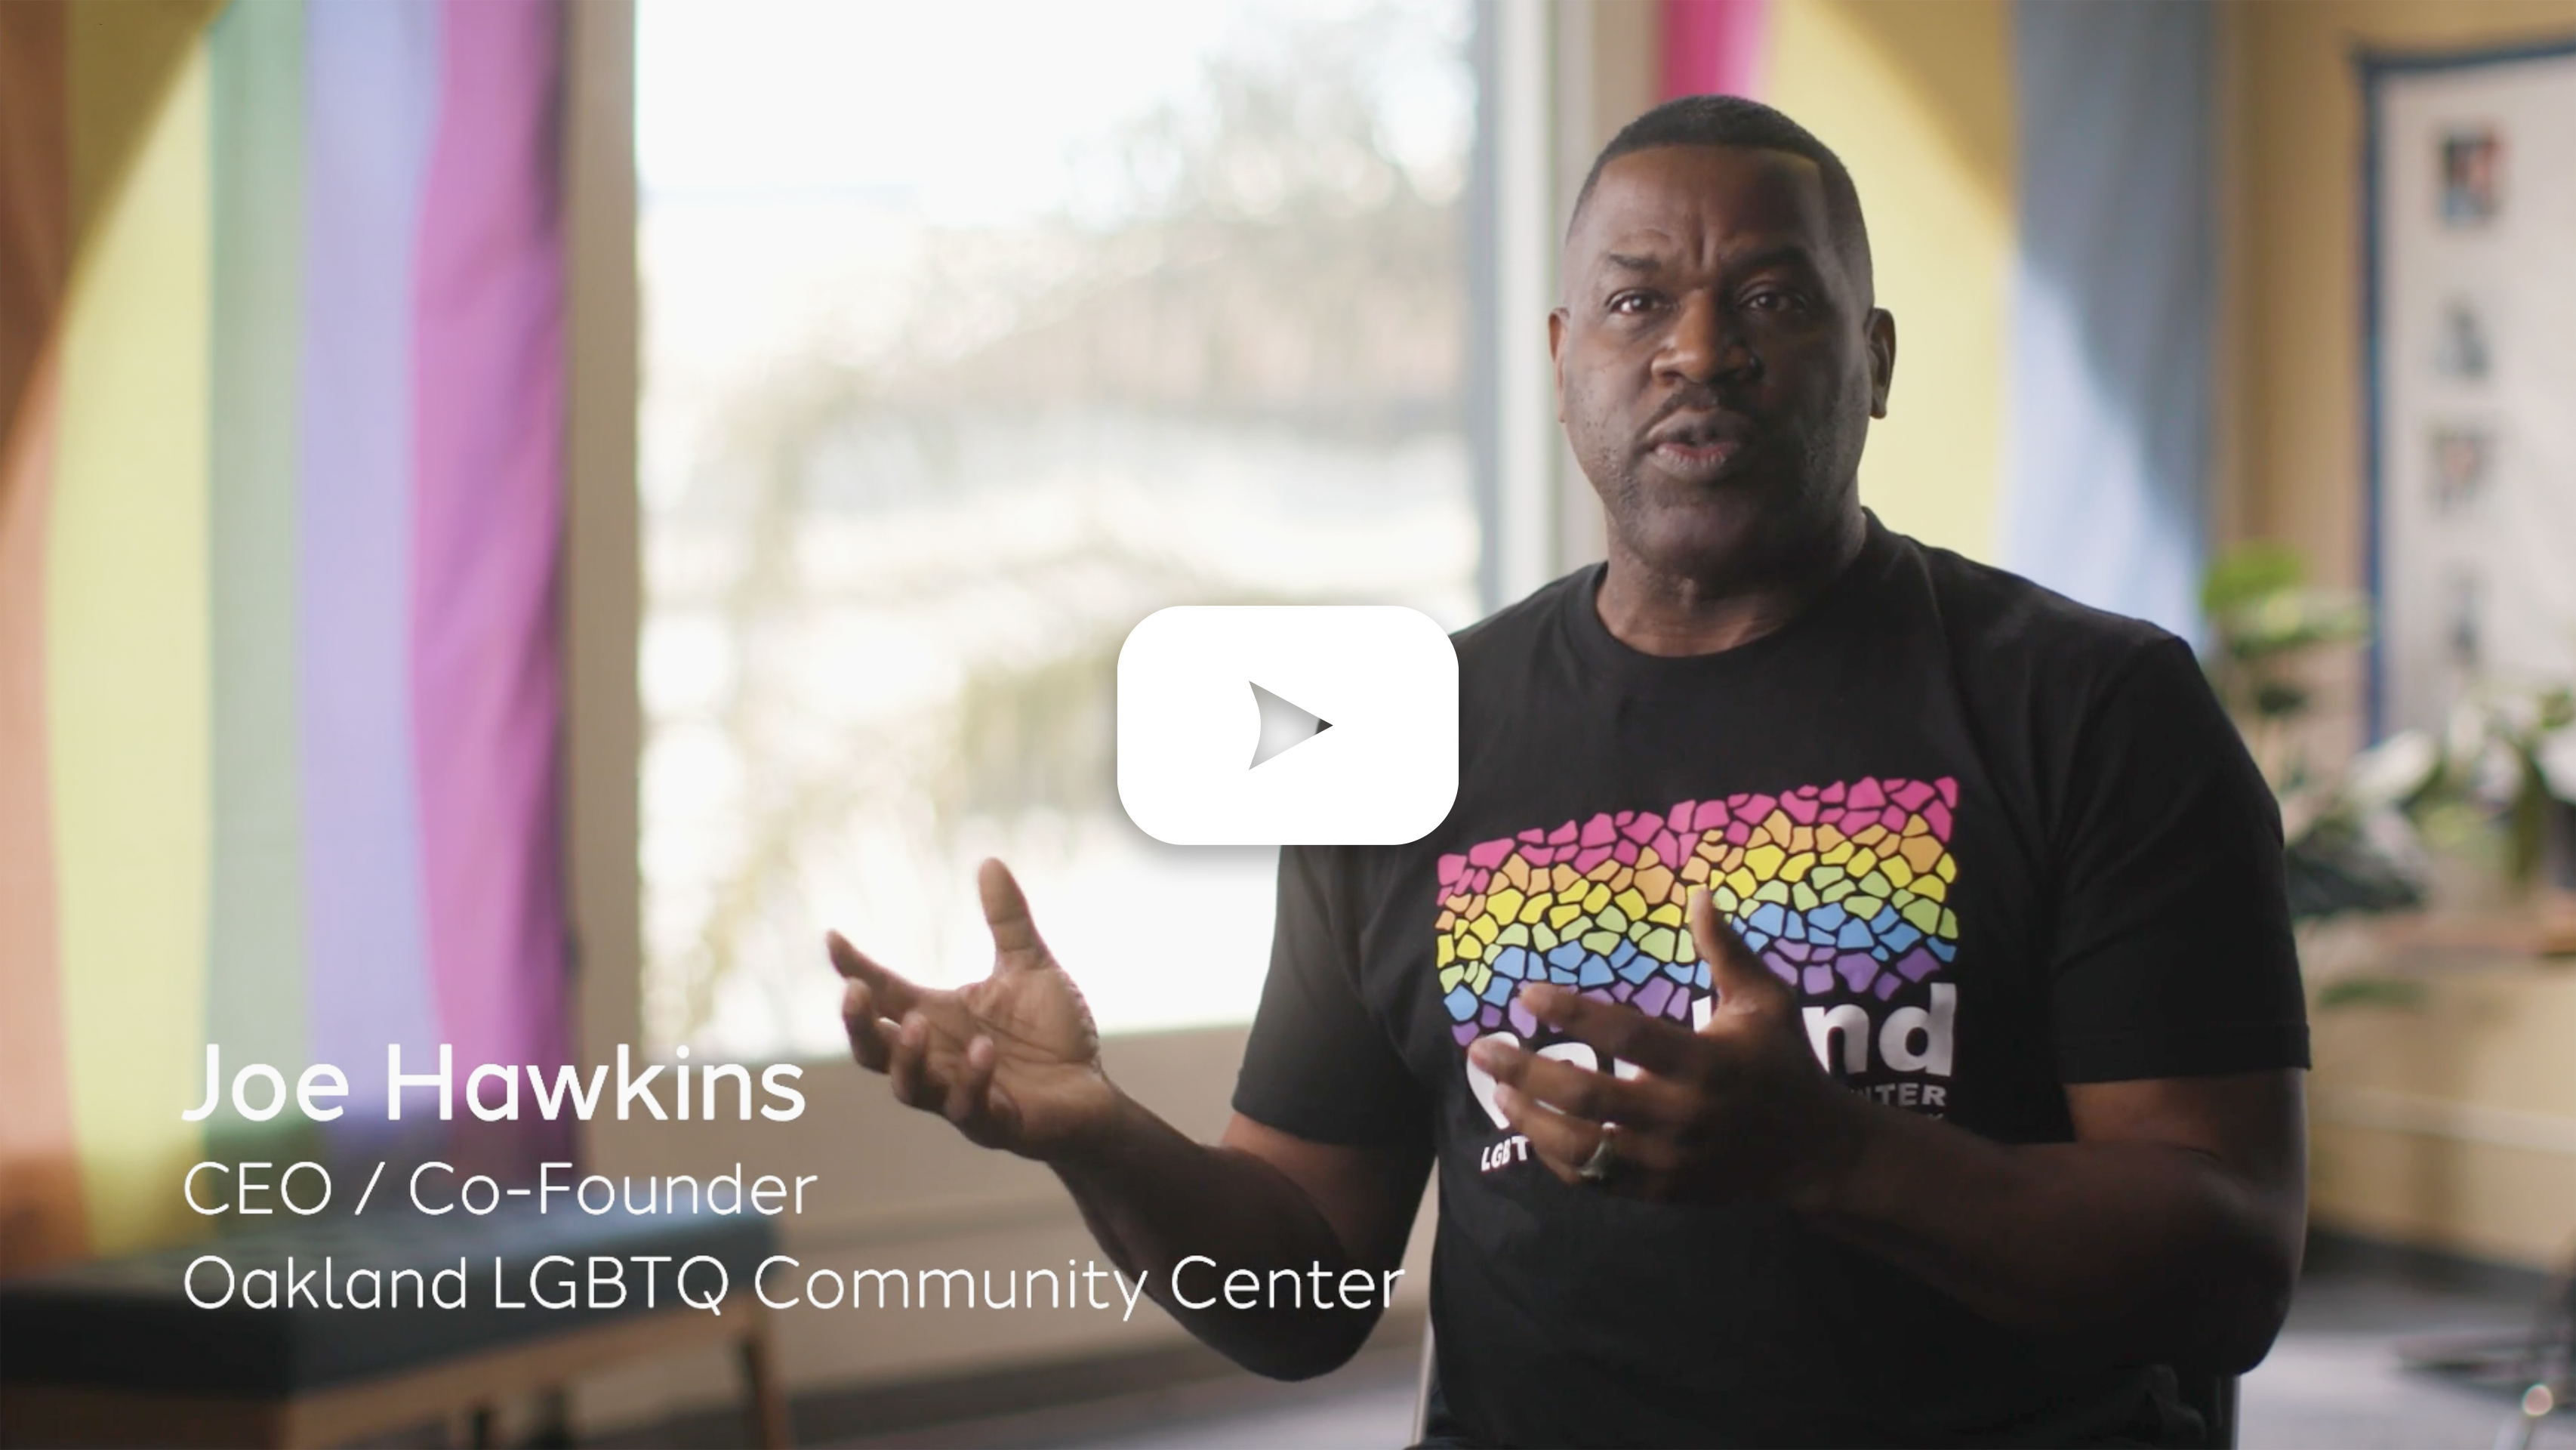 Oakland LGBTQ Community Center works to improve sexual health education and health services.